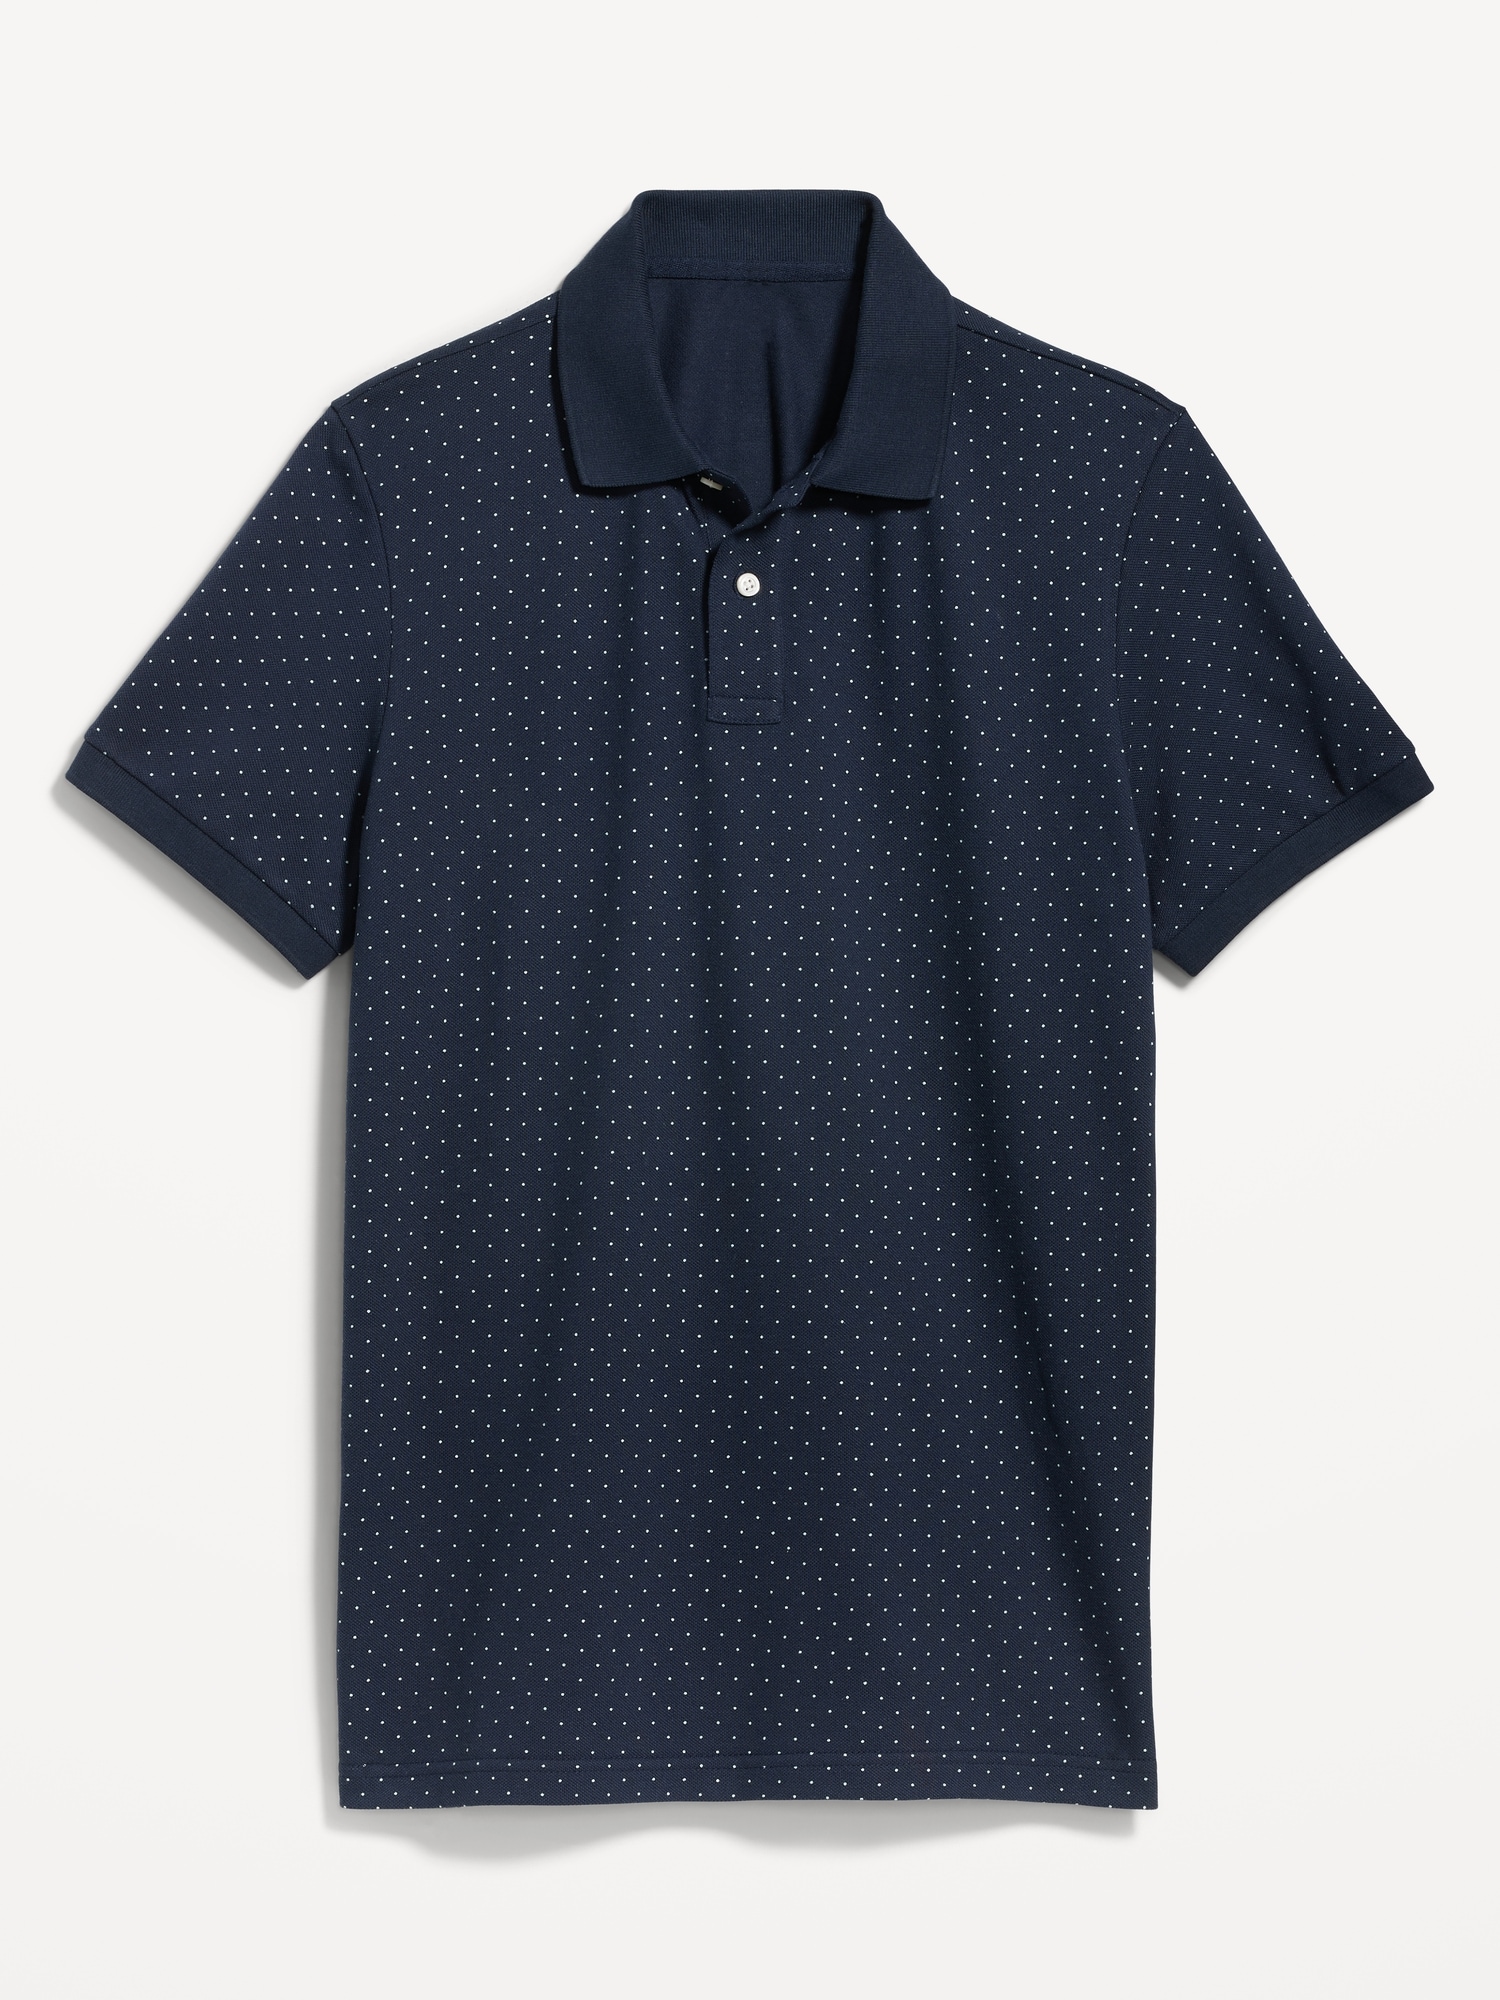 Old Navy Printed Classic Fit Pique Polo blue. 1